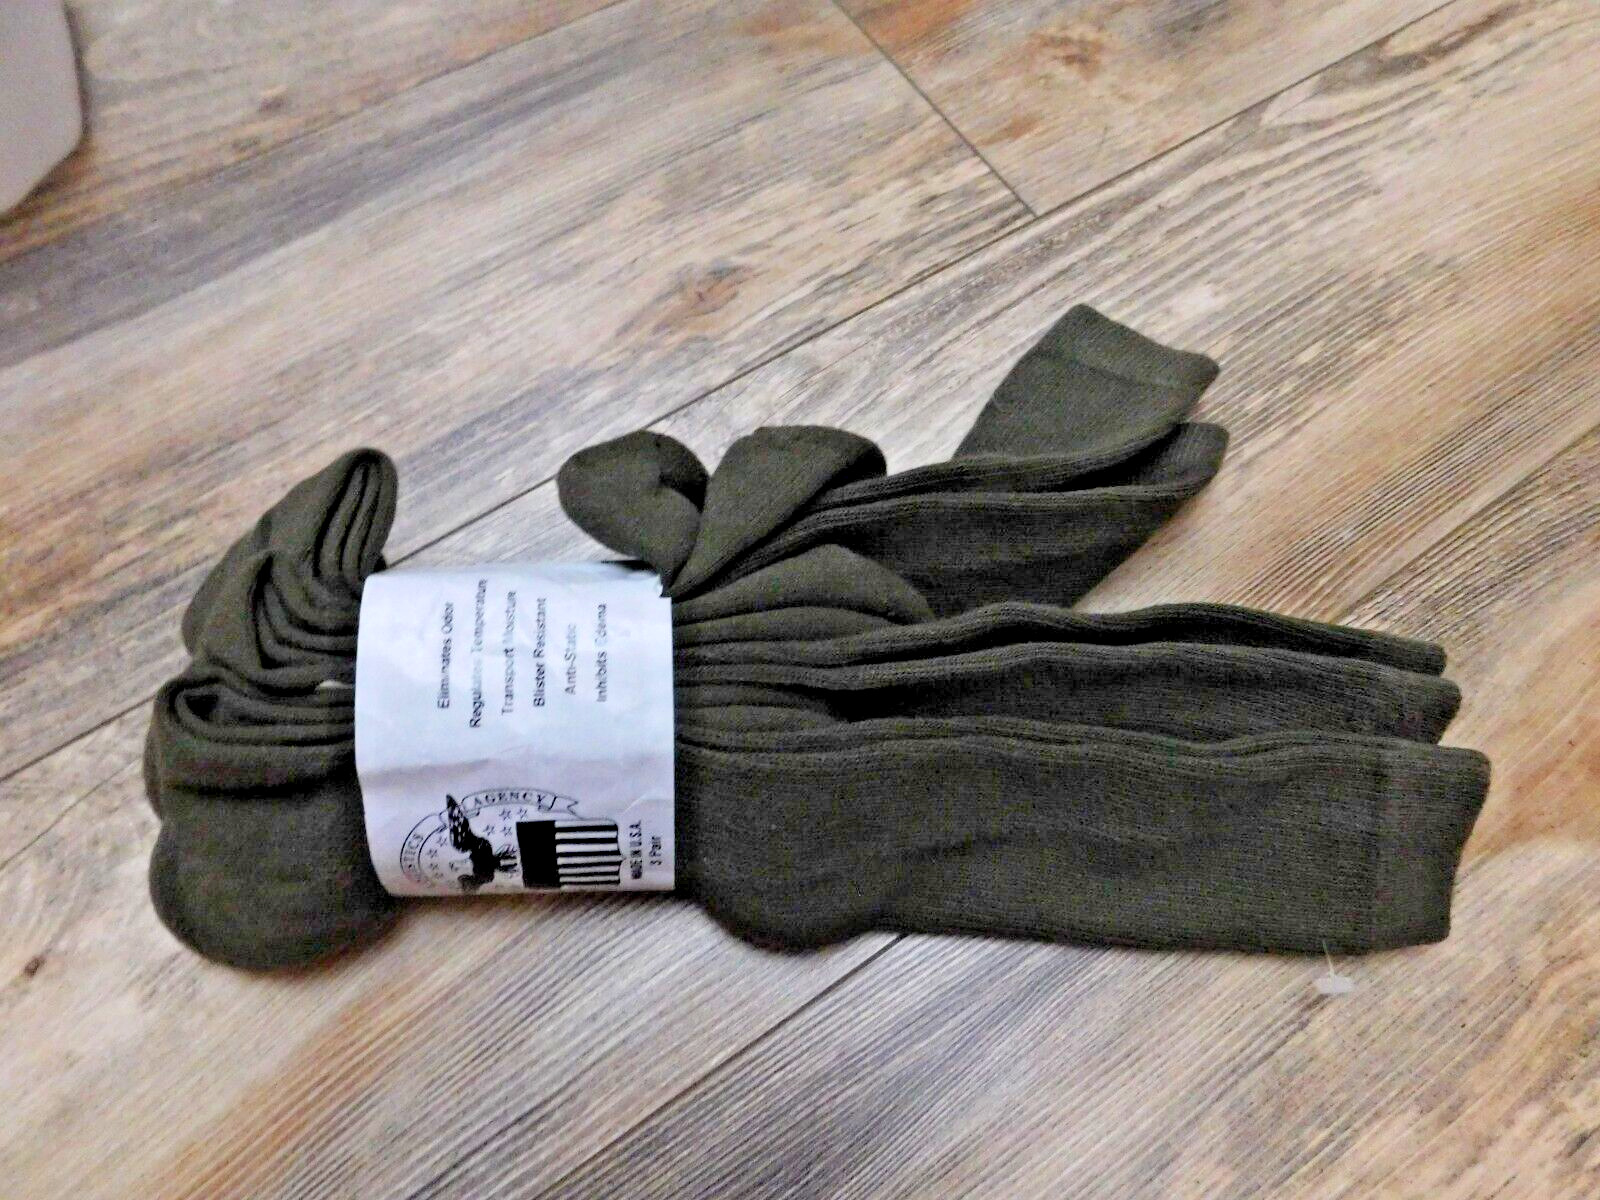 3 MILITARY BOOT SOCKS GREEN SIZE LARGE 12-13 NEW